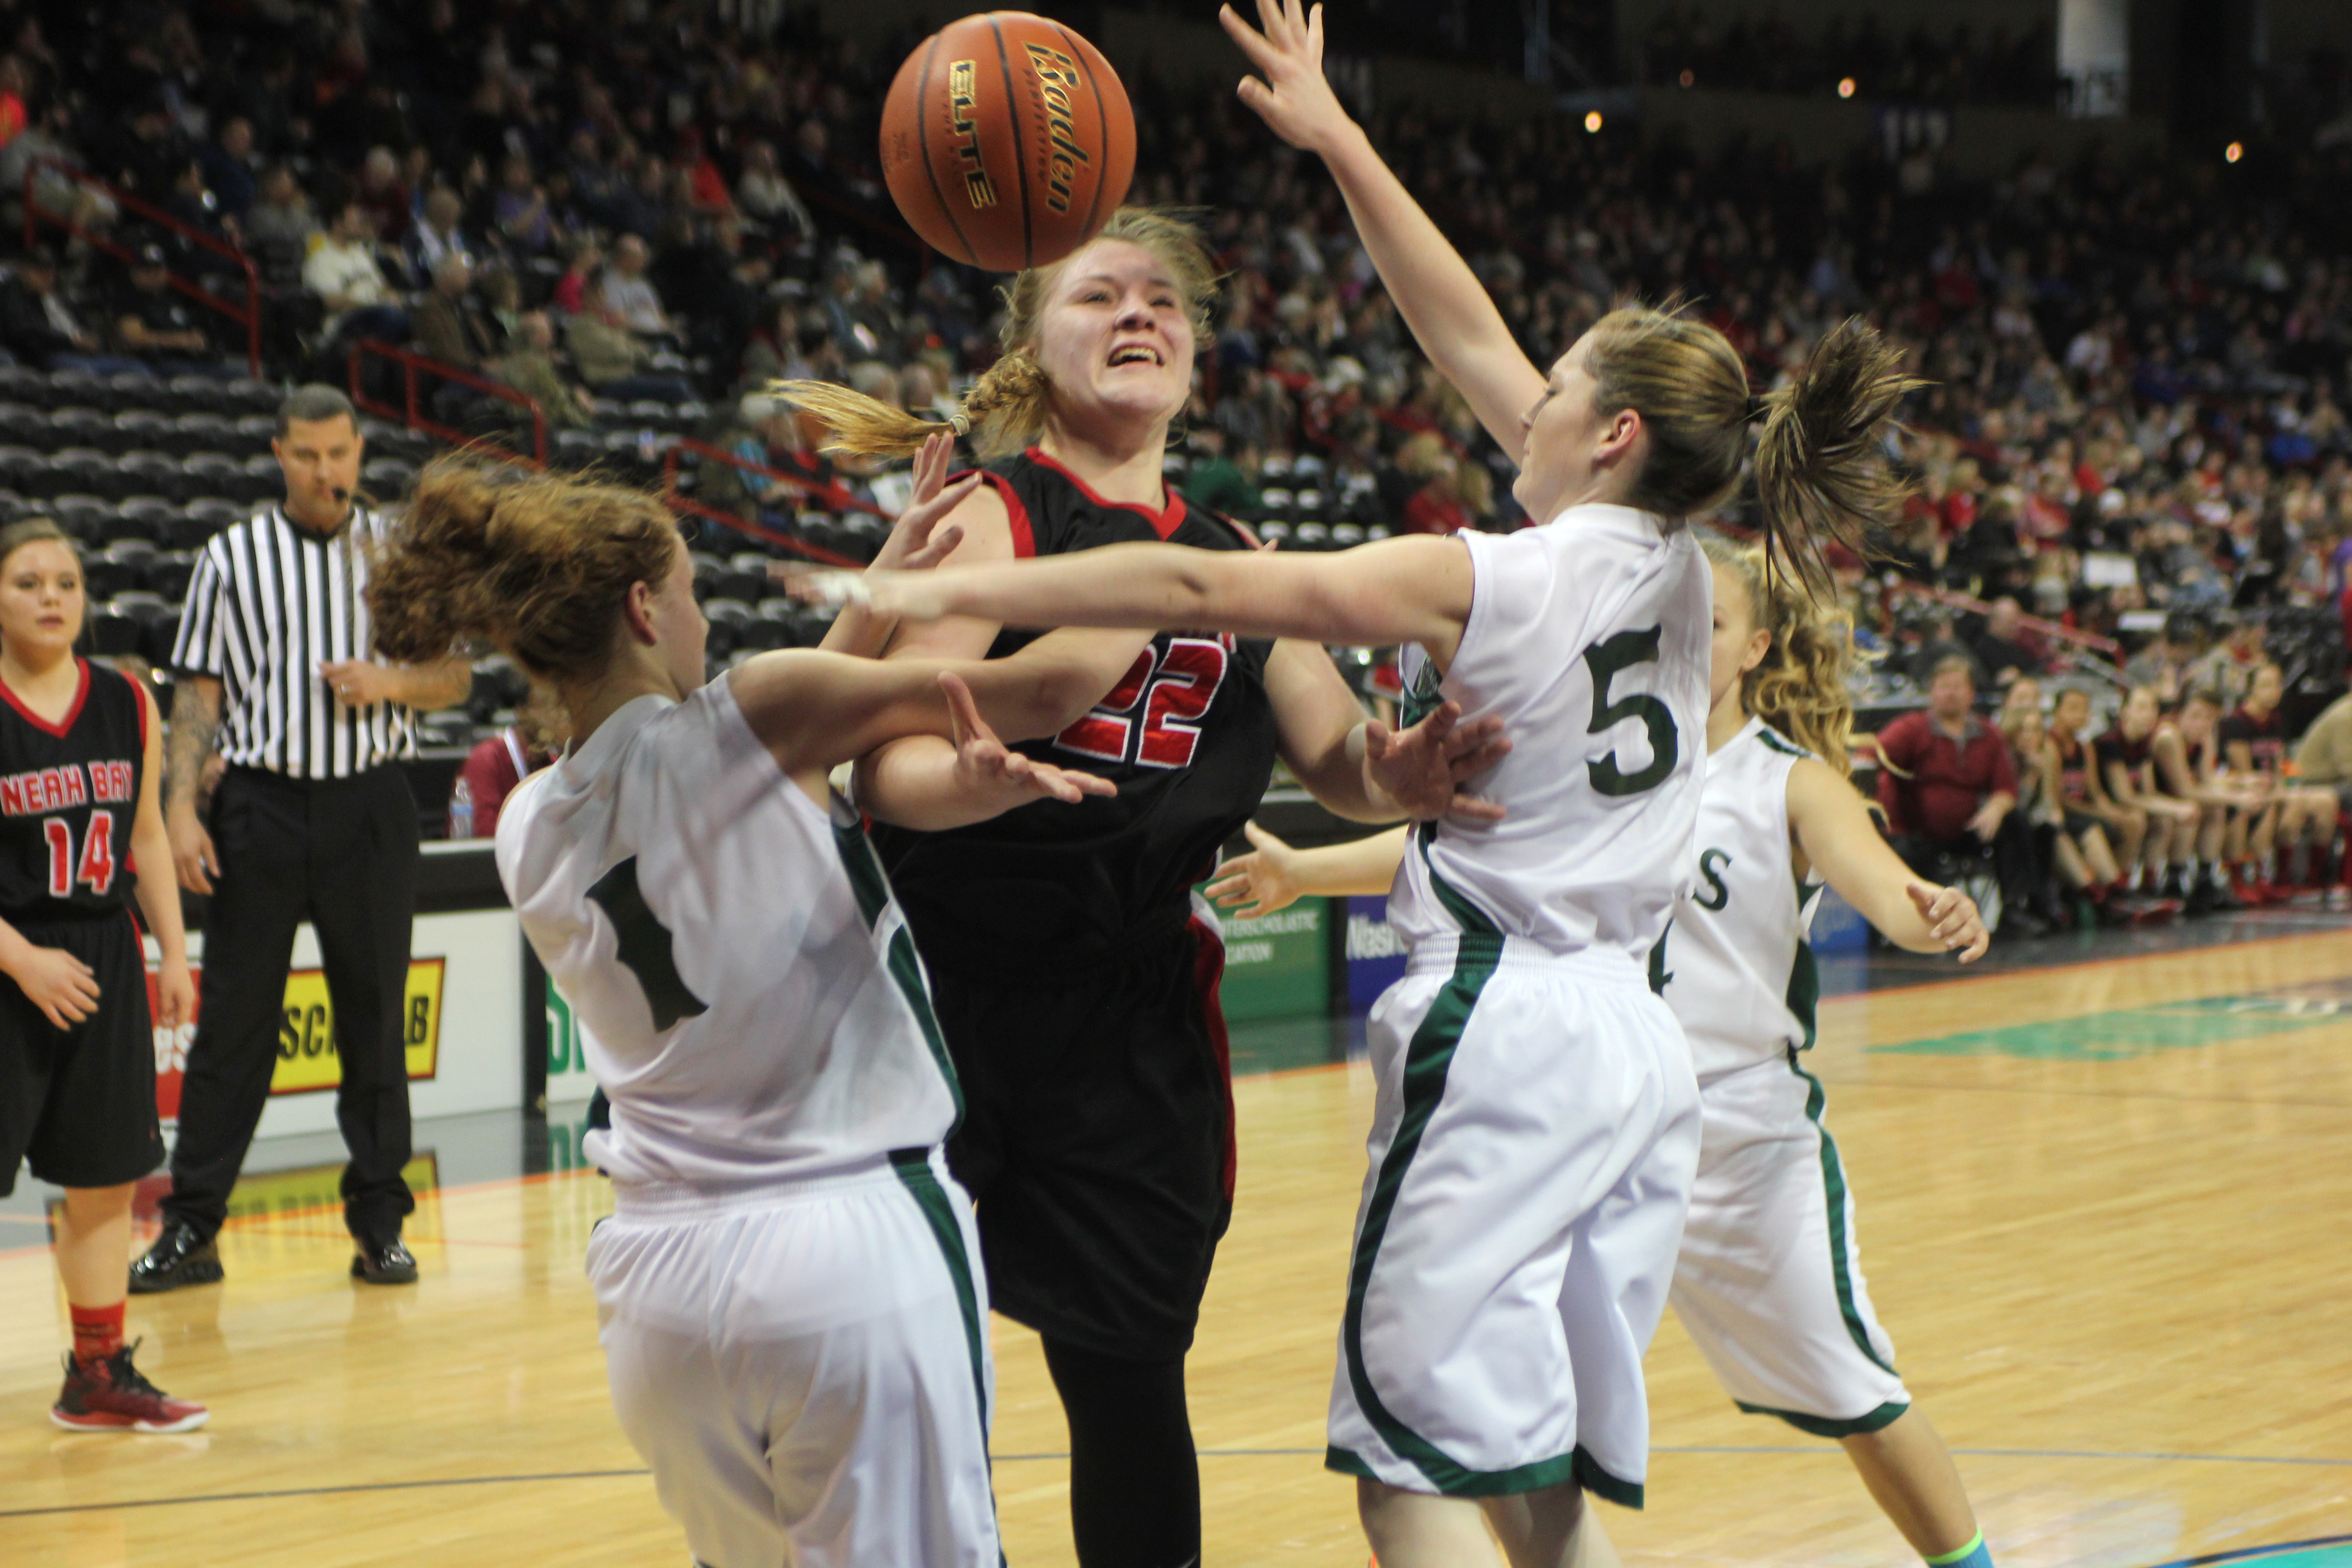 Neah Bay's Faye Chartraw is fouled by Mary M. Knight's Jaycee Valley